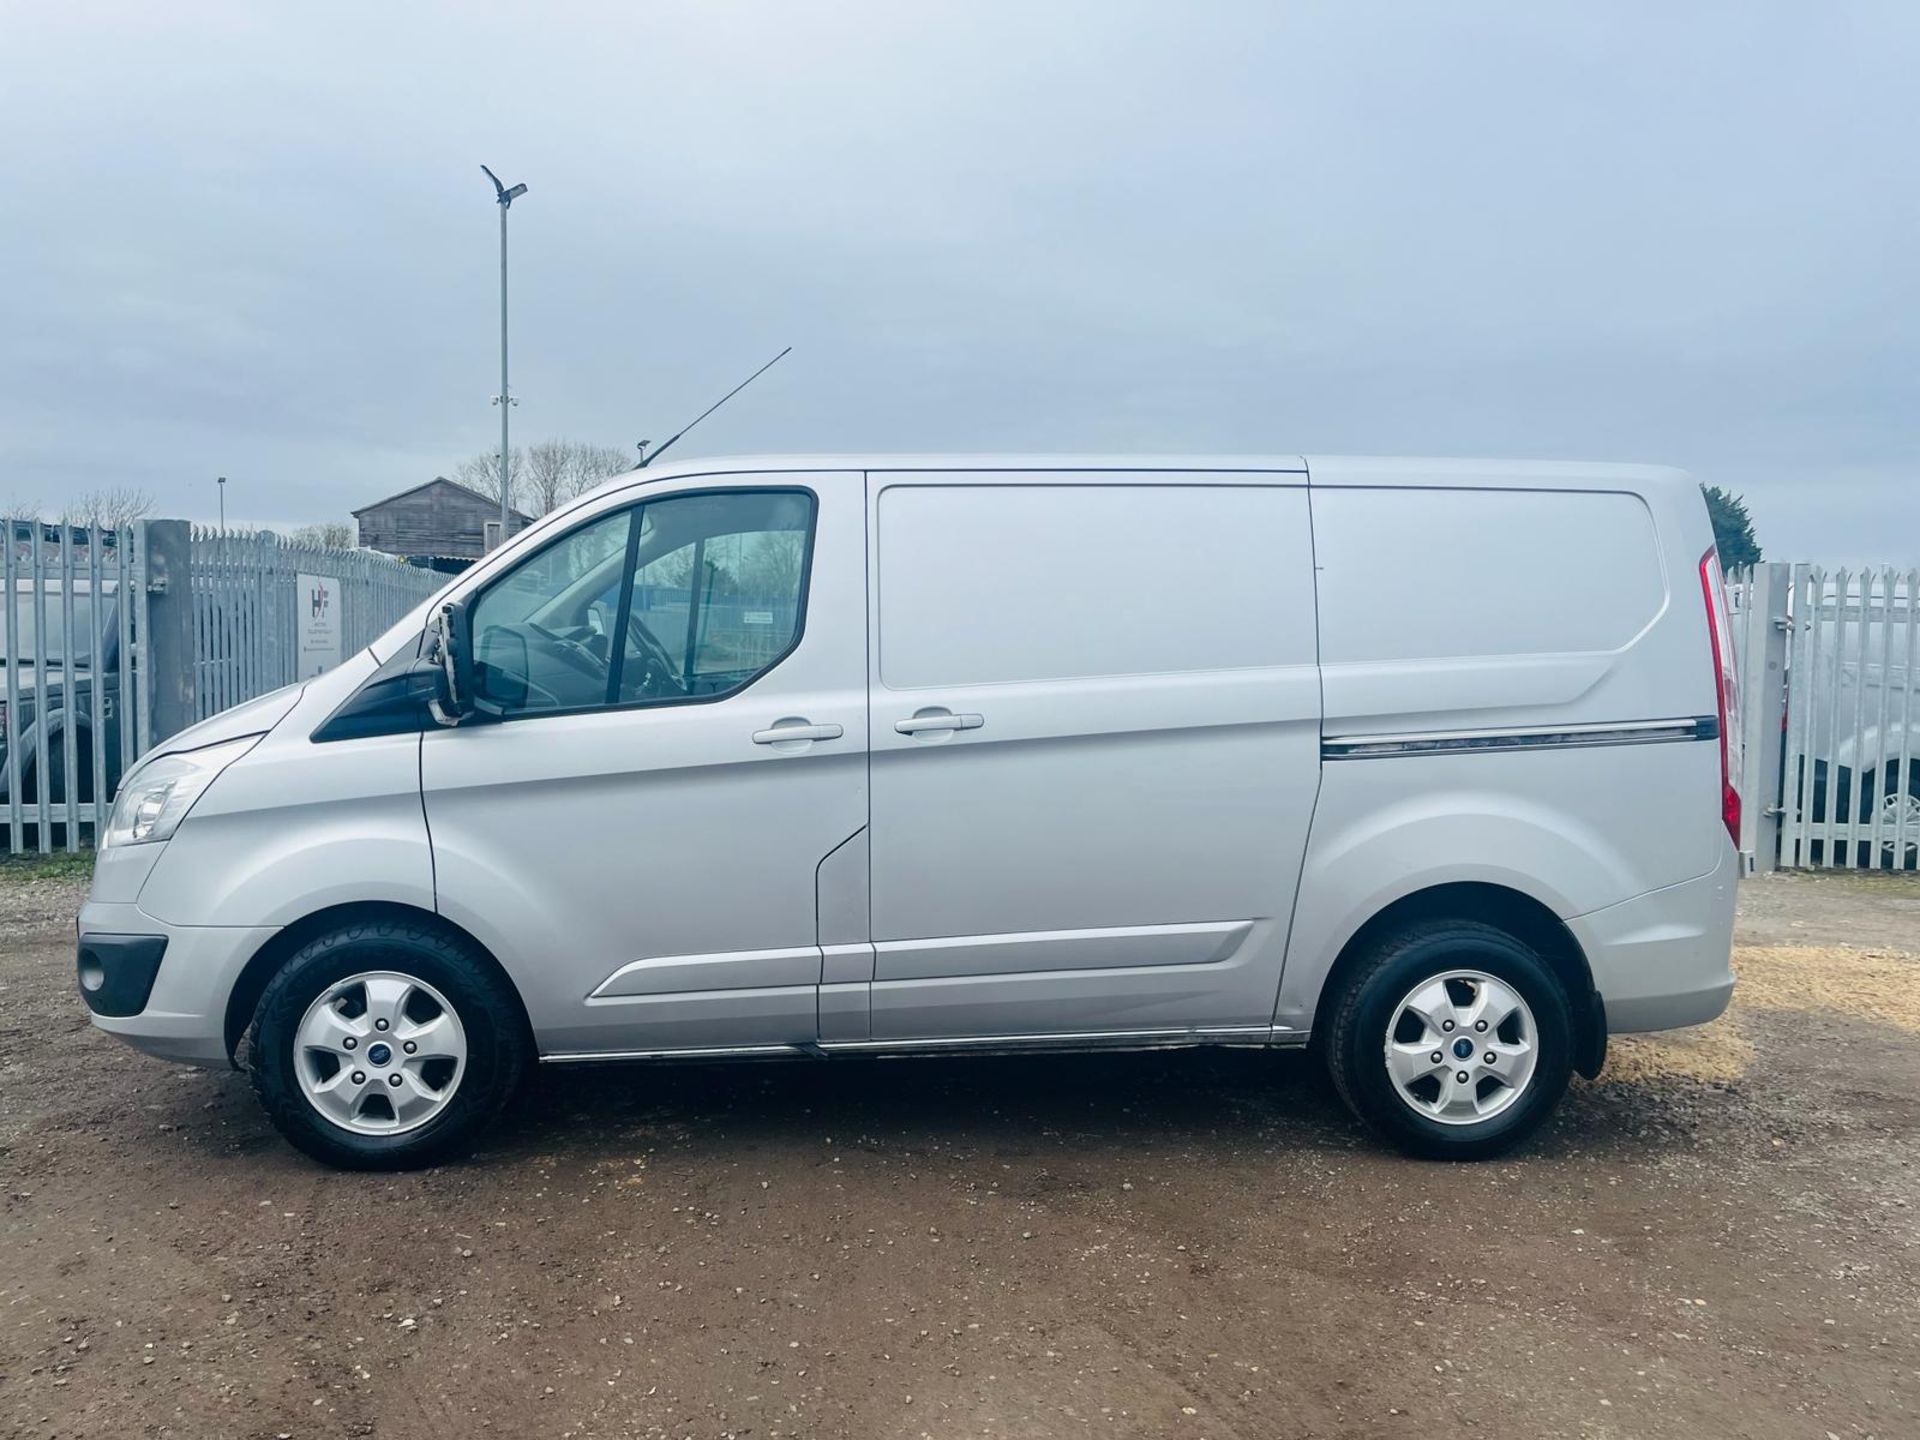 ** ON SALE ** Ford Transit Custom 130 2.0 Tdci Limited L1H1 PanelVan 2017'67 Reg'-1 Previous Owner - Image 4 of 27